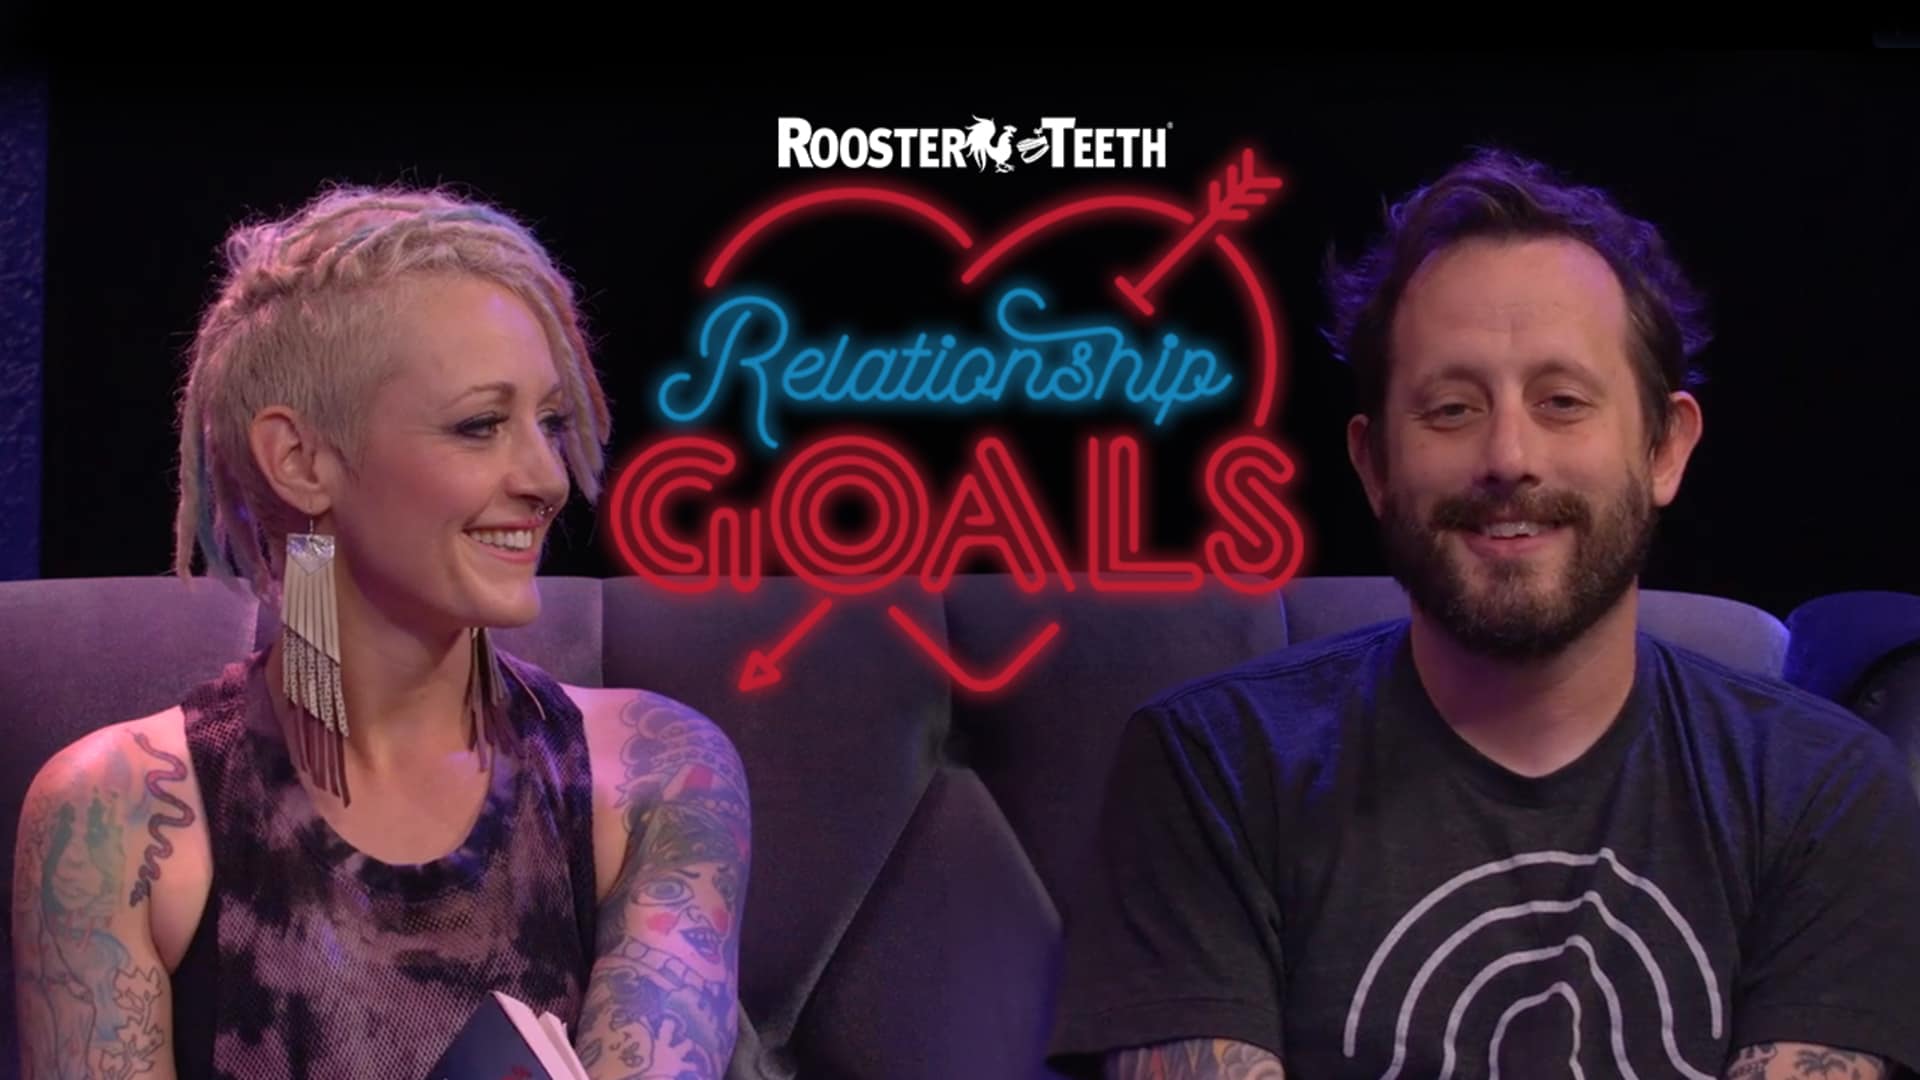 Griffin rooster teeth